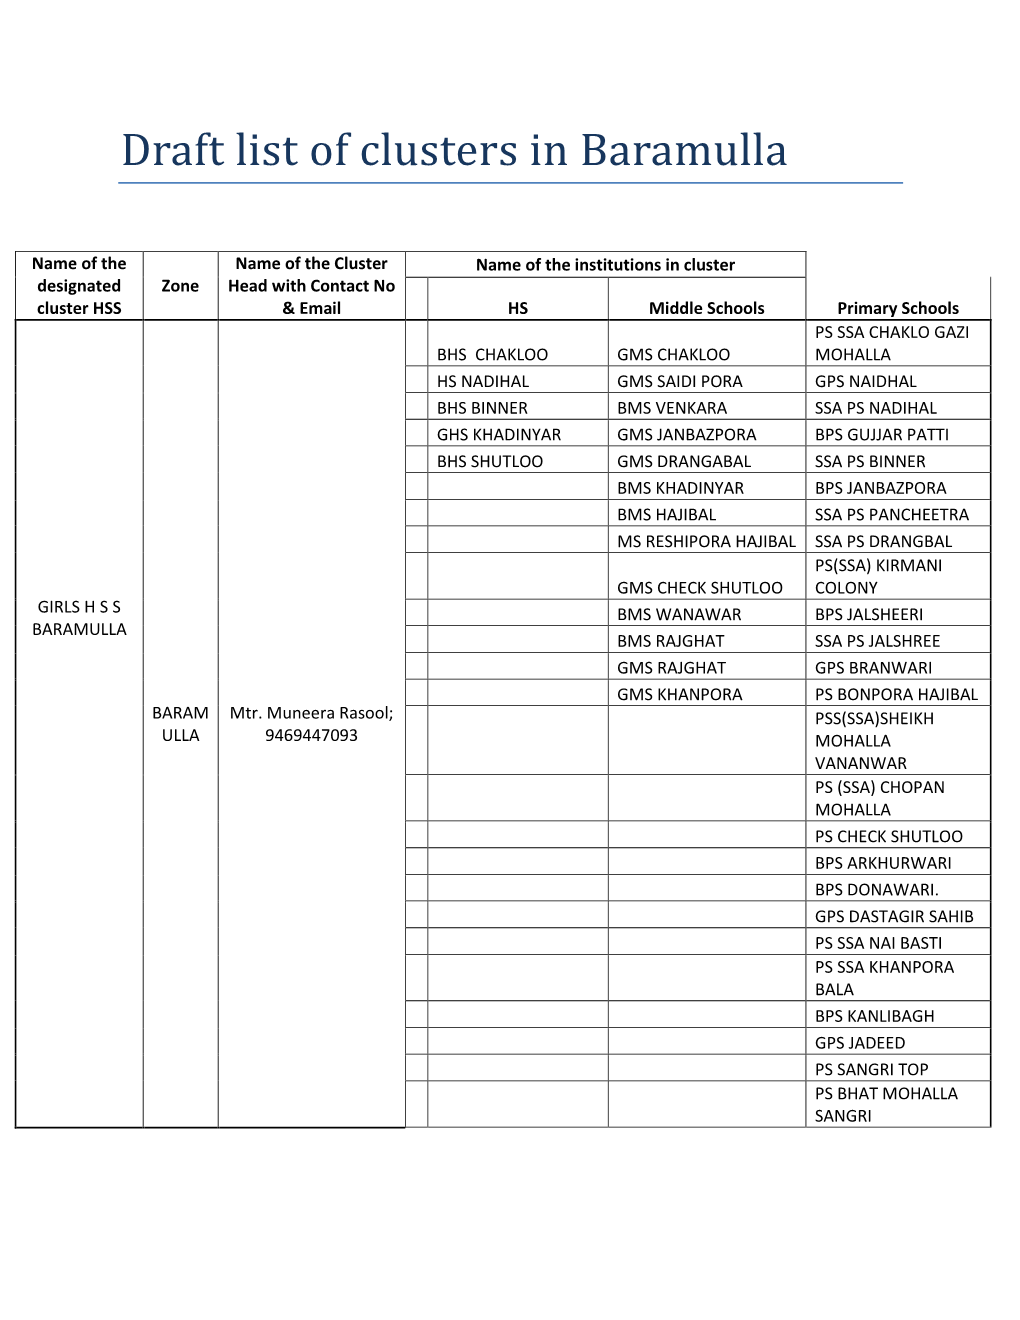 Draft List of Clusters in Baramulla